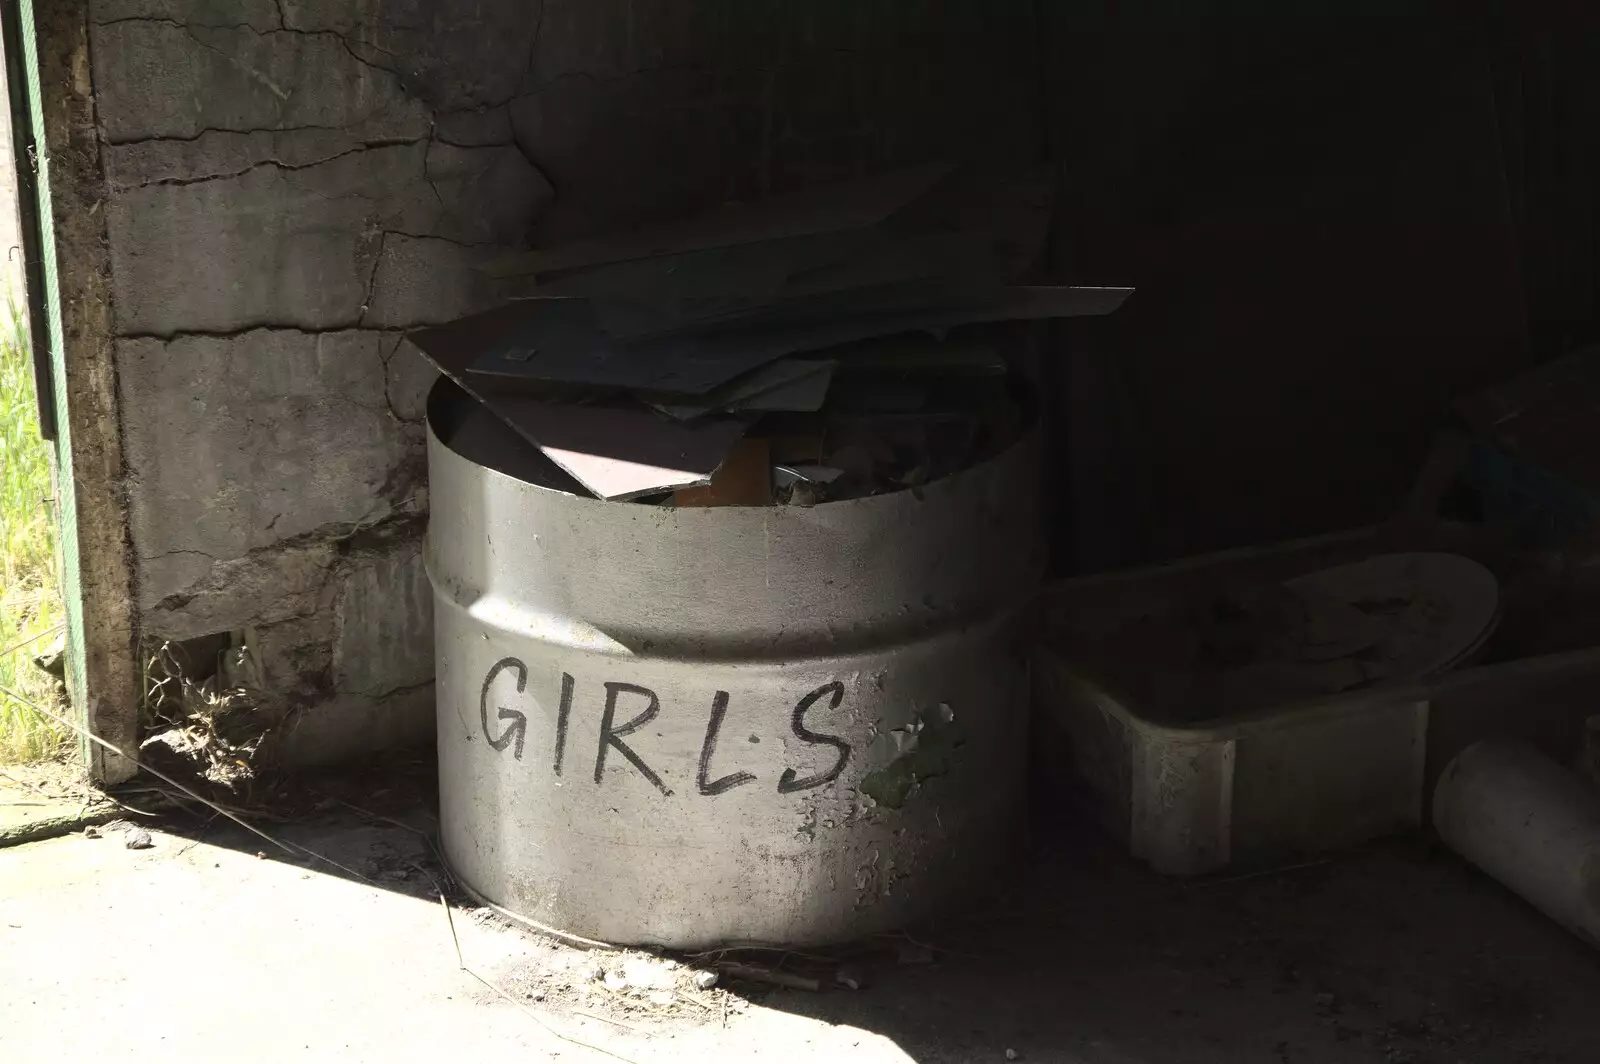 A tub simply says 'girls', from A 1940s Timewarp, Site 4, Bungay Airfield, Flixton, Suffolk - 9th June 2022